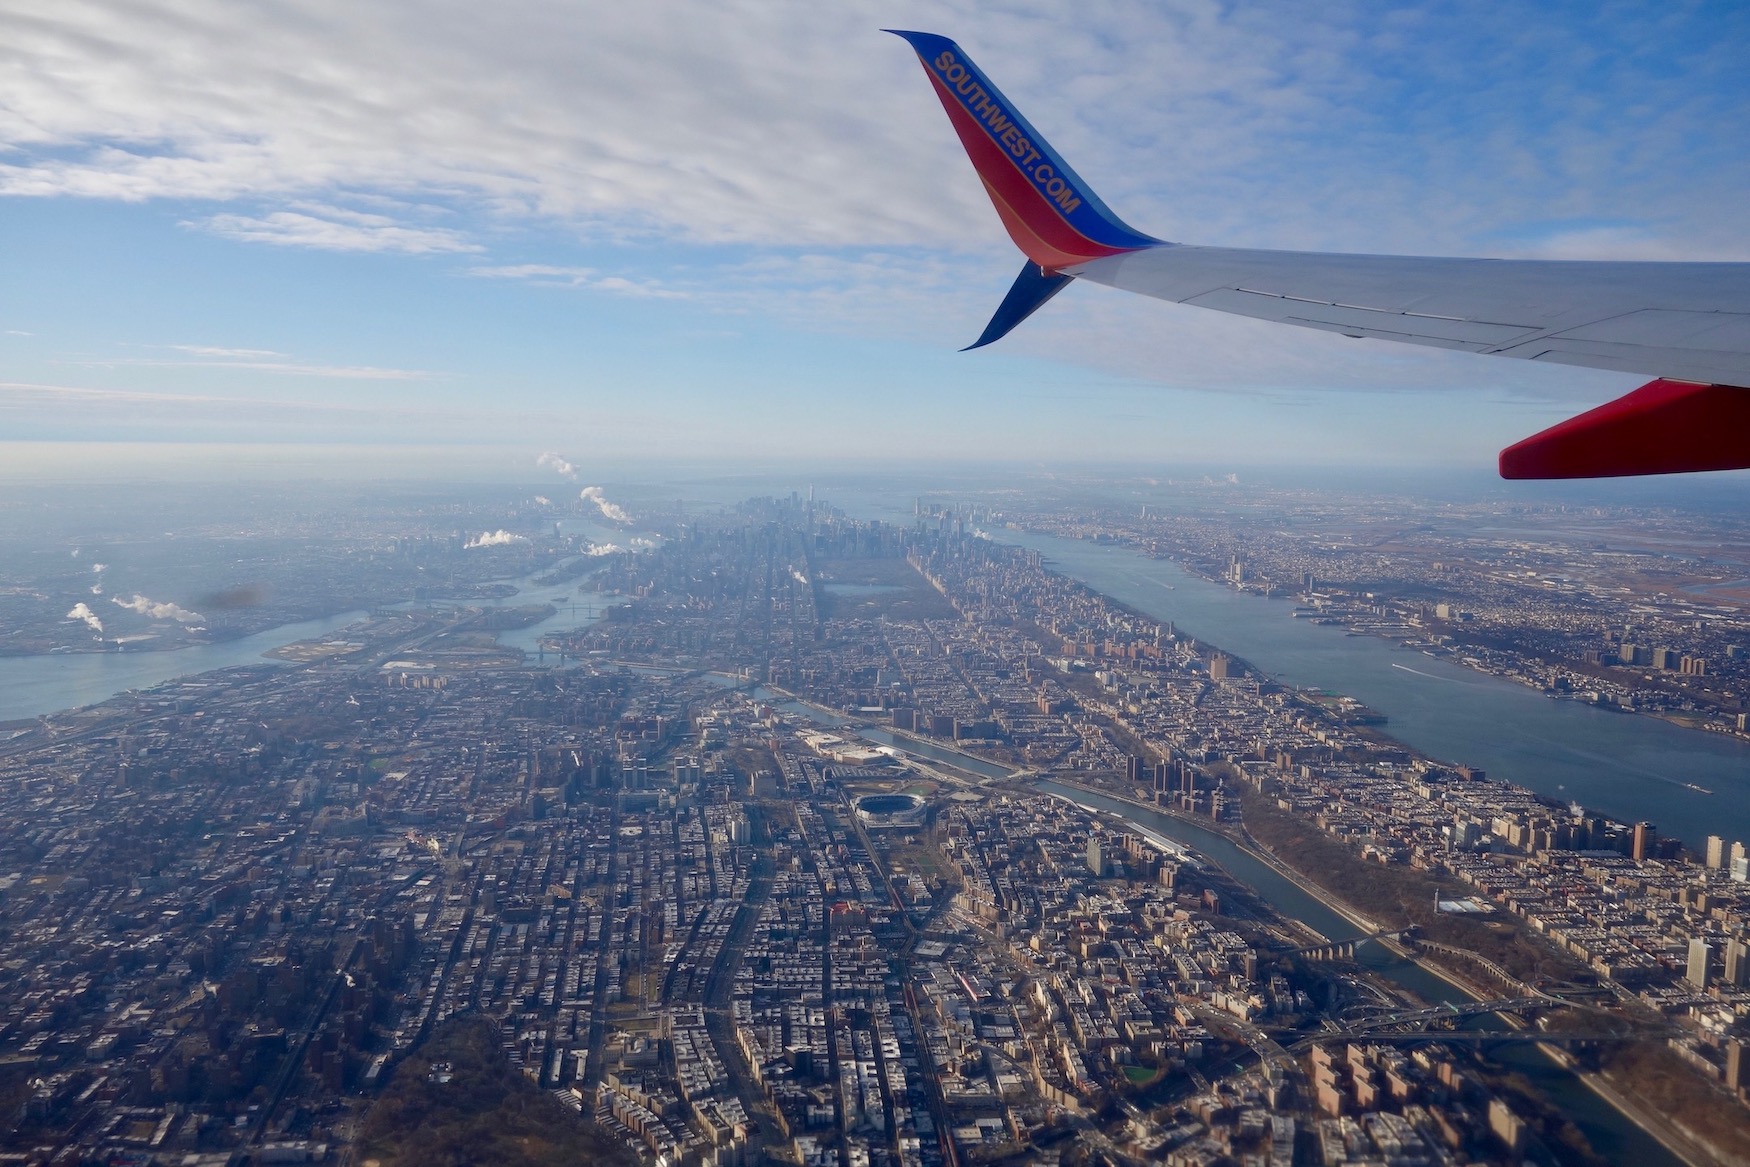 On a mostly clear day, New York City and the Hudson, Harlem and East rivers are visible below the outer wing of a Southwest Airlines 737-700 jet flying out of John F. Kennedy International Airport.